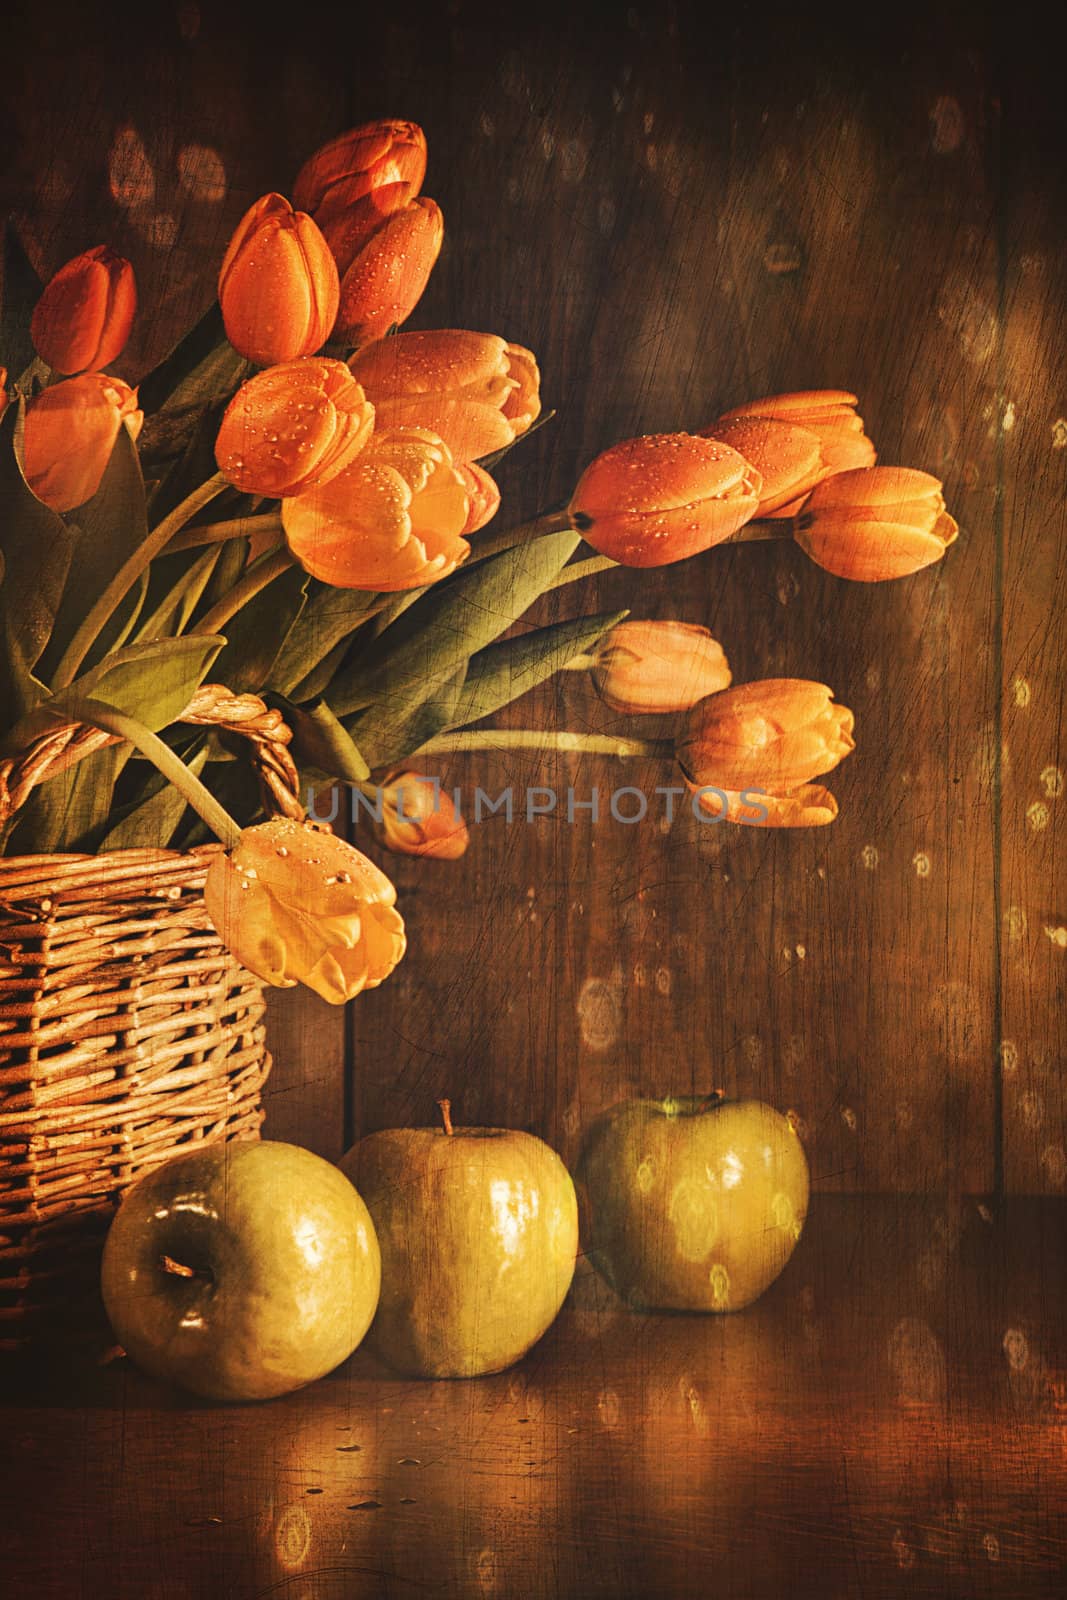 Spring tulips and with vintage feeling by Sandralise